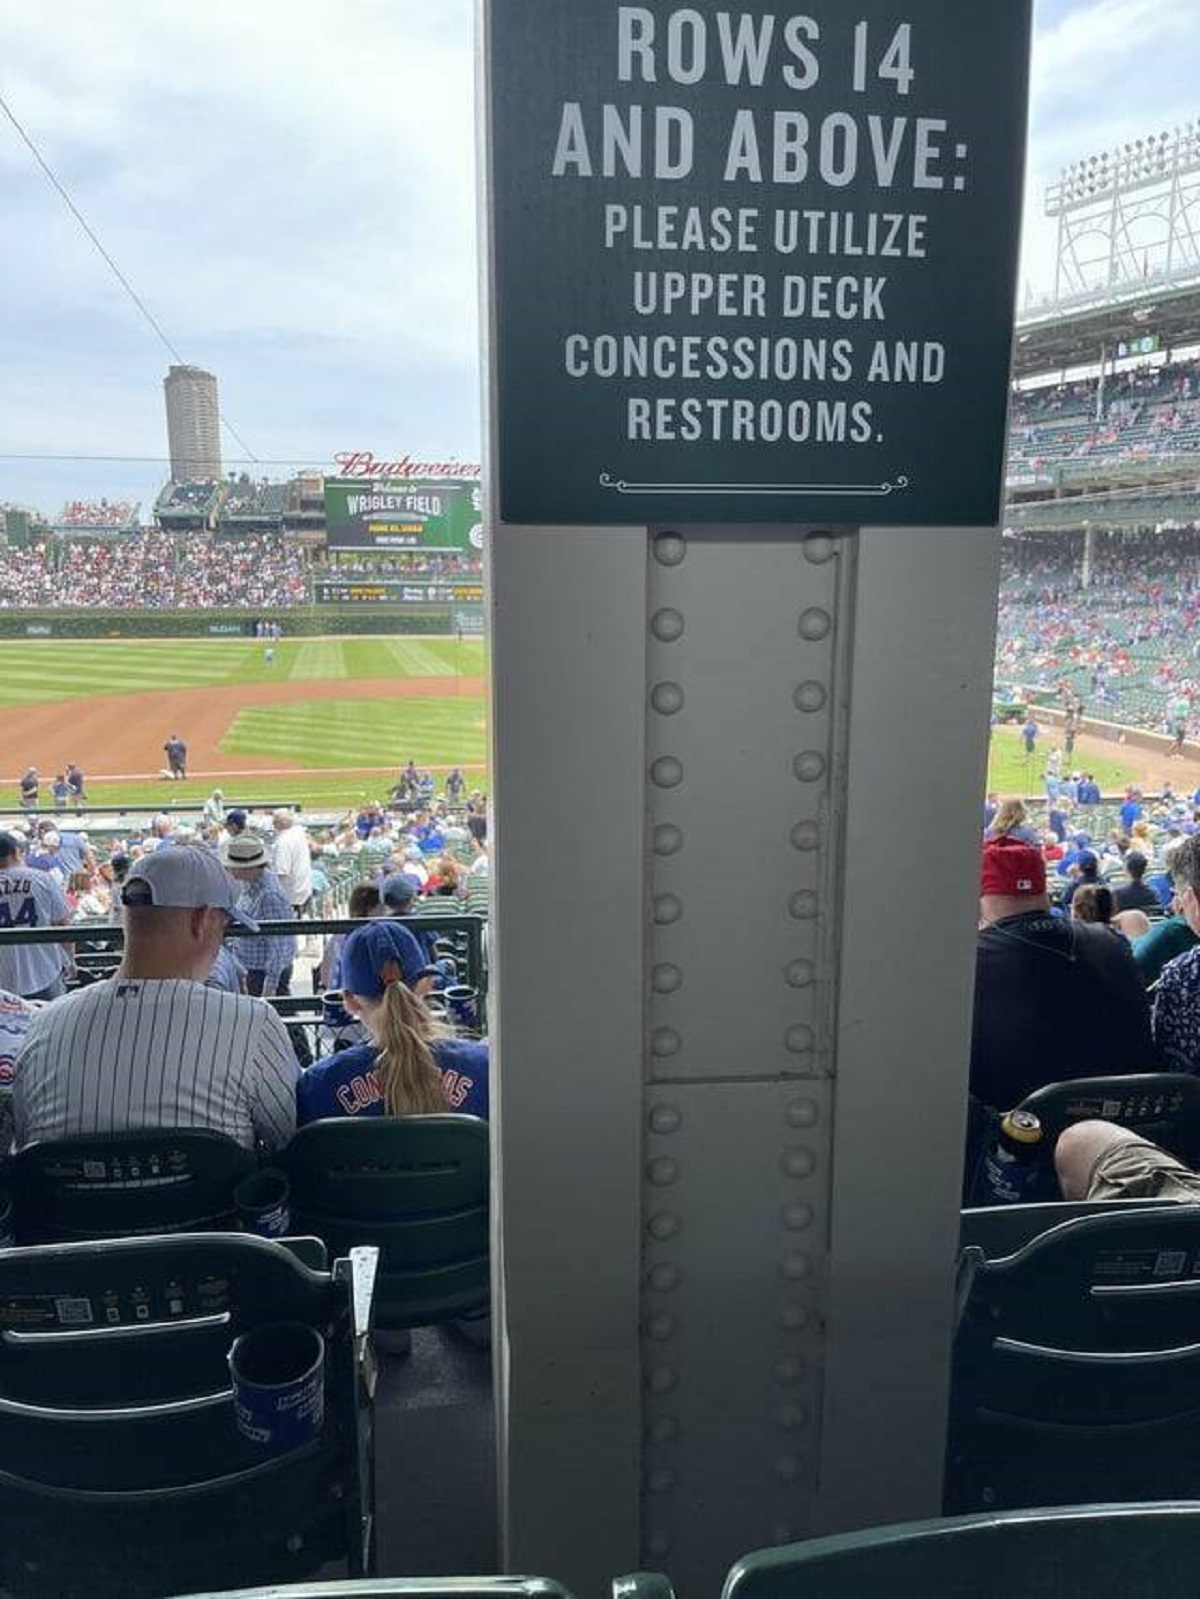 "$350 for unobstructed view of cubs game at Wrigley for Father’s Day with my kid. FU StubHub!"